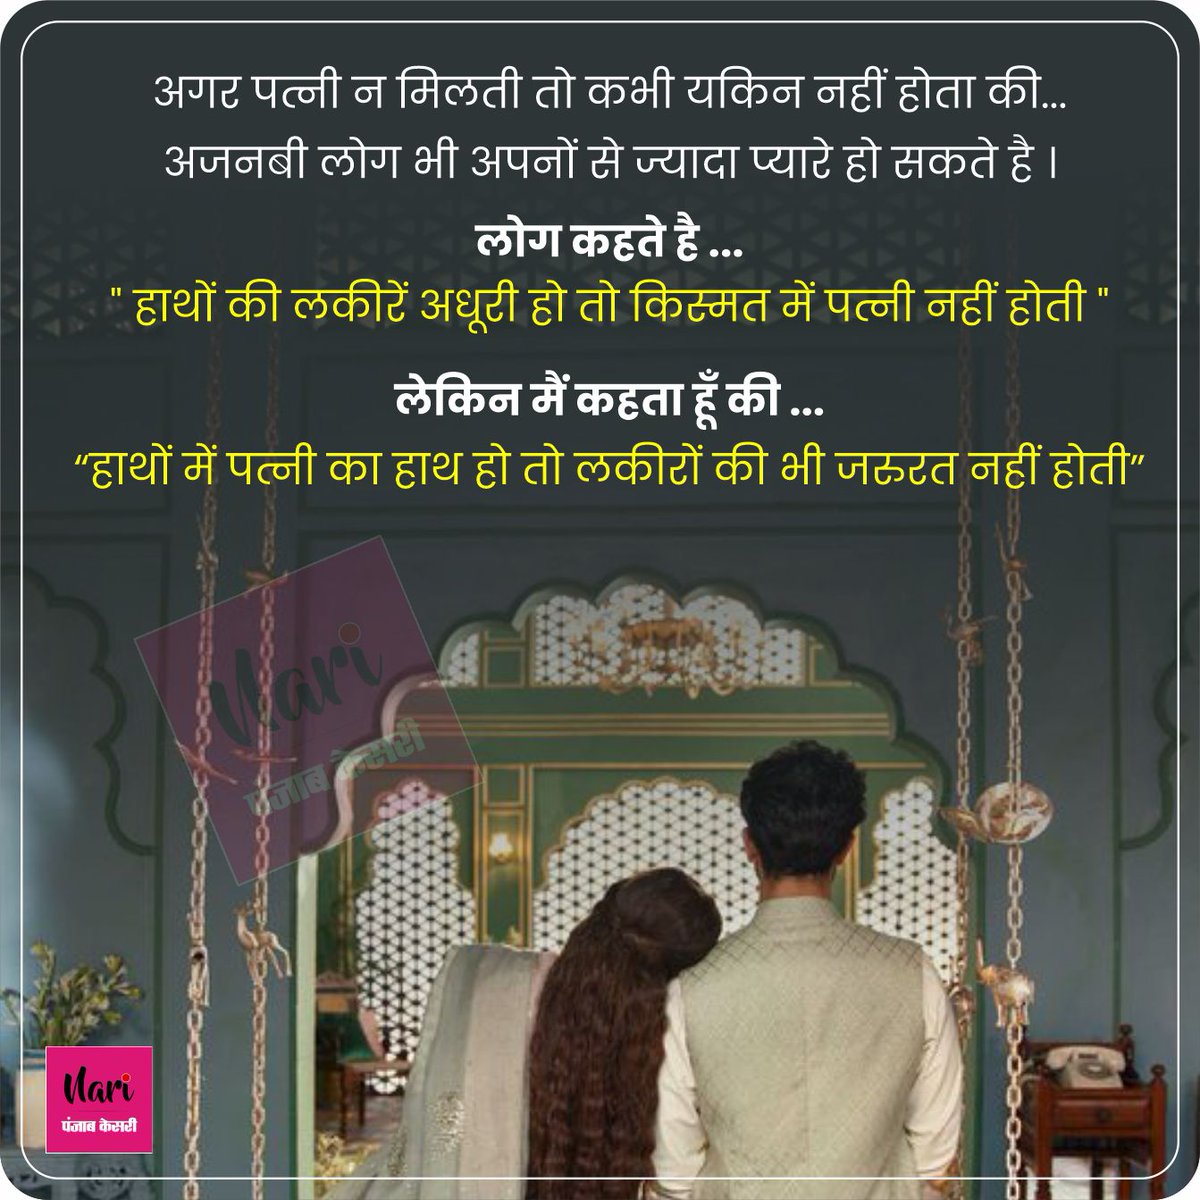 #Relationshiptips  #relationshipgoals #relationshipquotes #relationship #Respectwomen  #womenempowerment #independentwoman #Mother #Motherinlaw #Daughter #Daughterinlaw #Love #Family #Motherinlaw #Husbandwife #Husband #Wife #sister #Brother